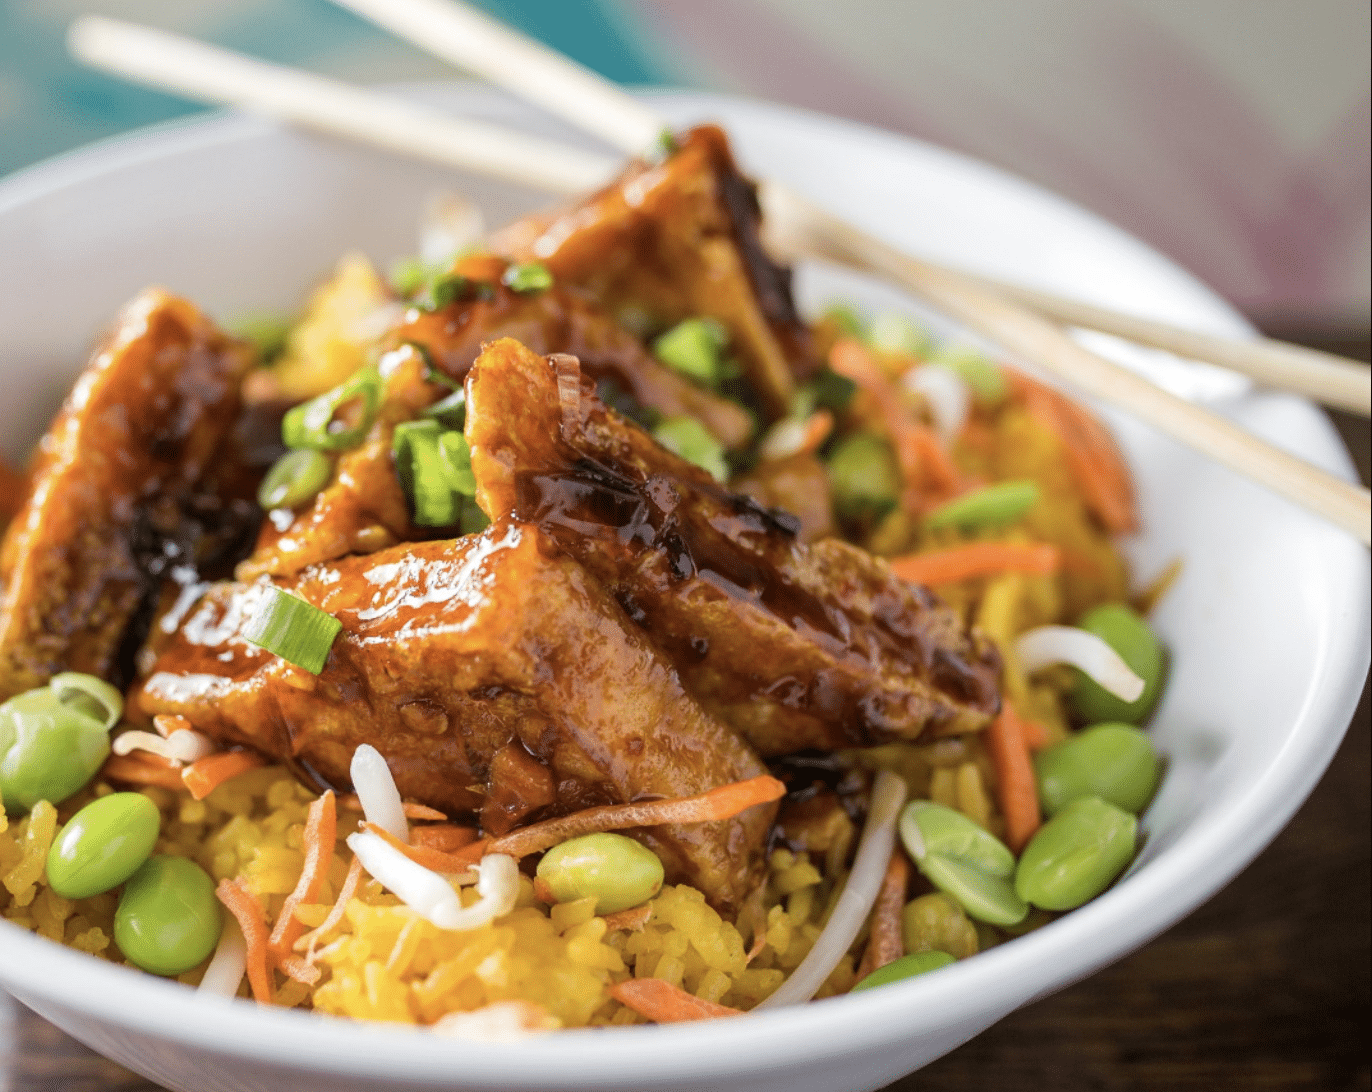 The Puerto Rican Rice Bowl in a white ceramic bowl with chopsticks from Saucy Pork in chicago